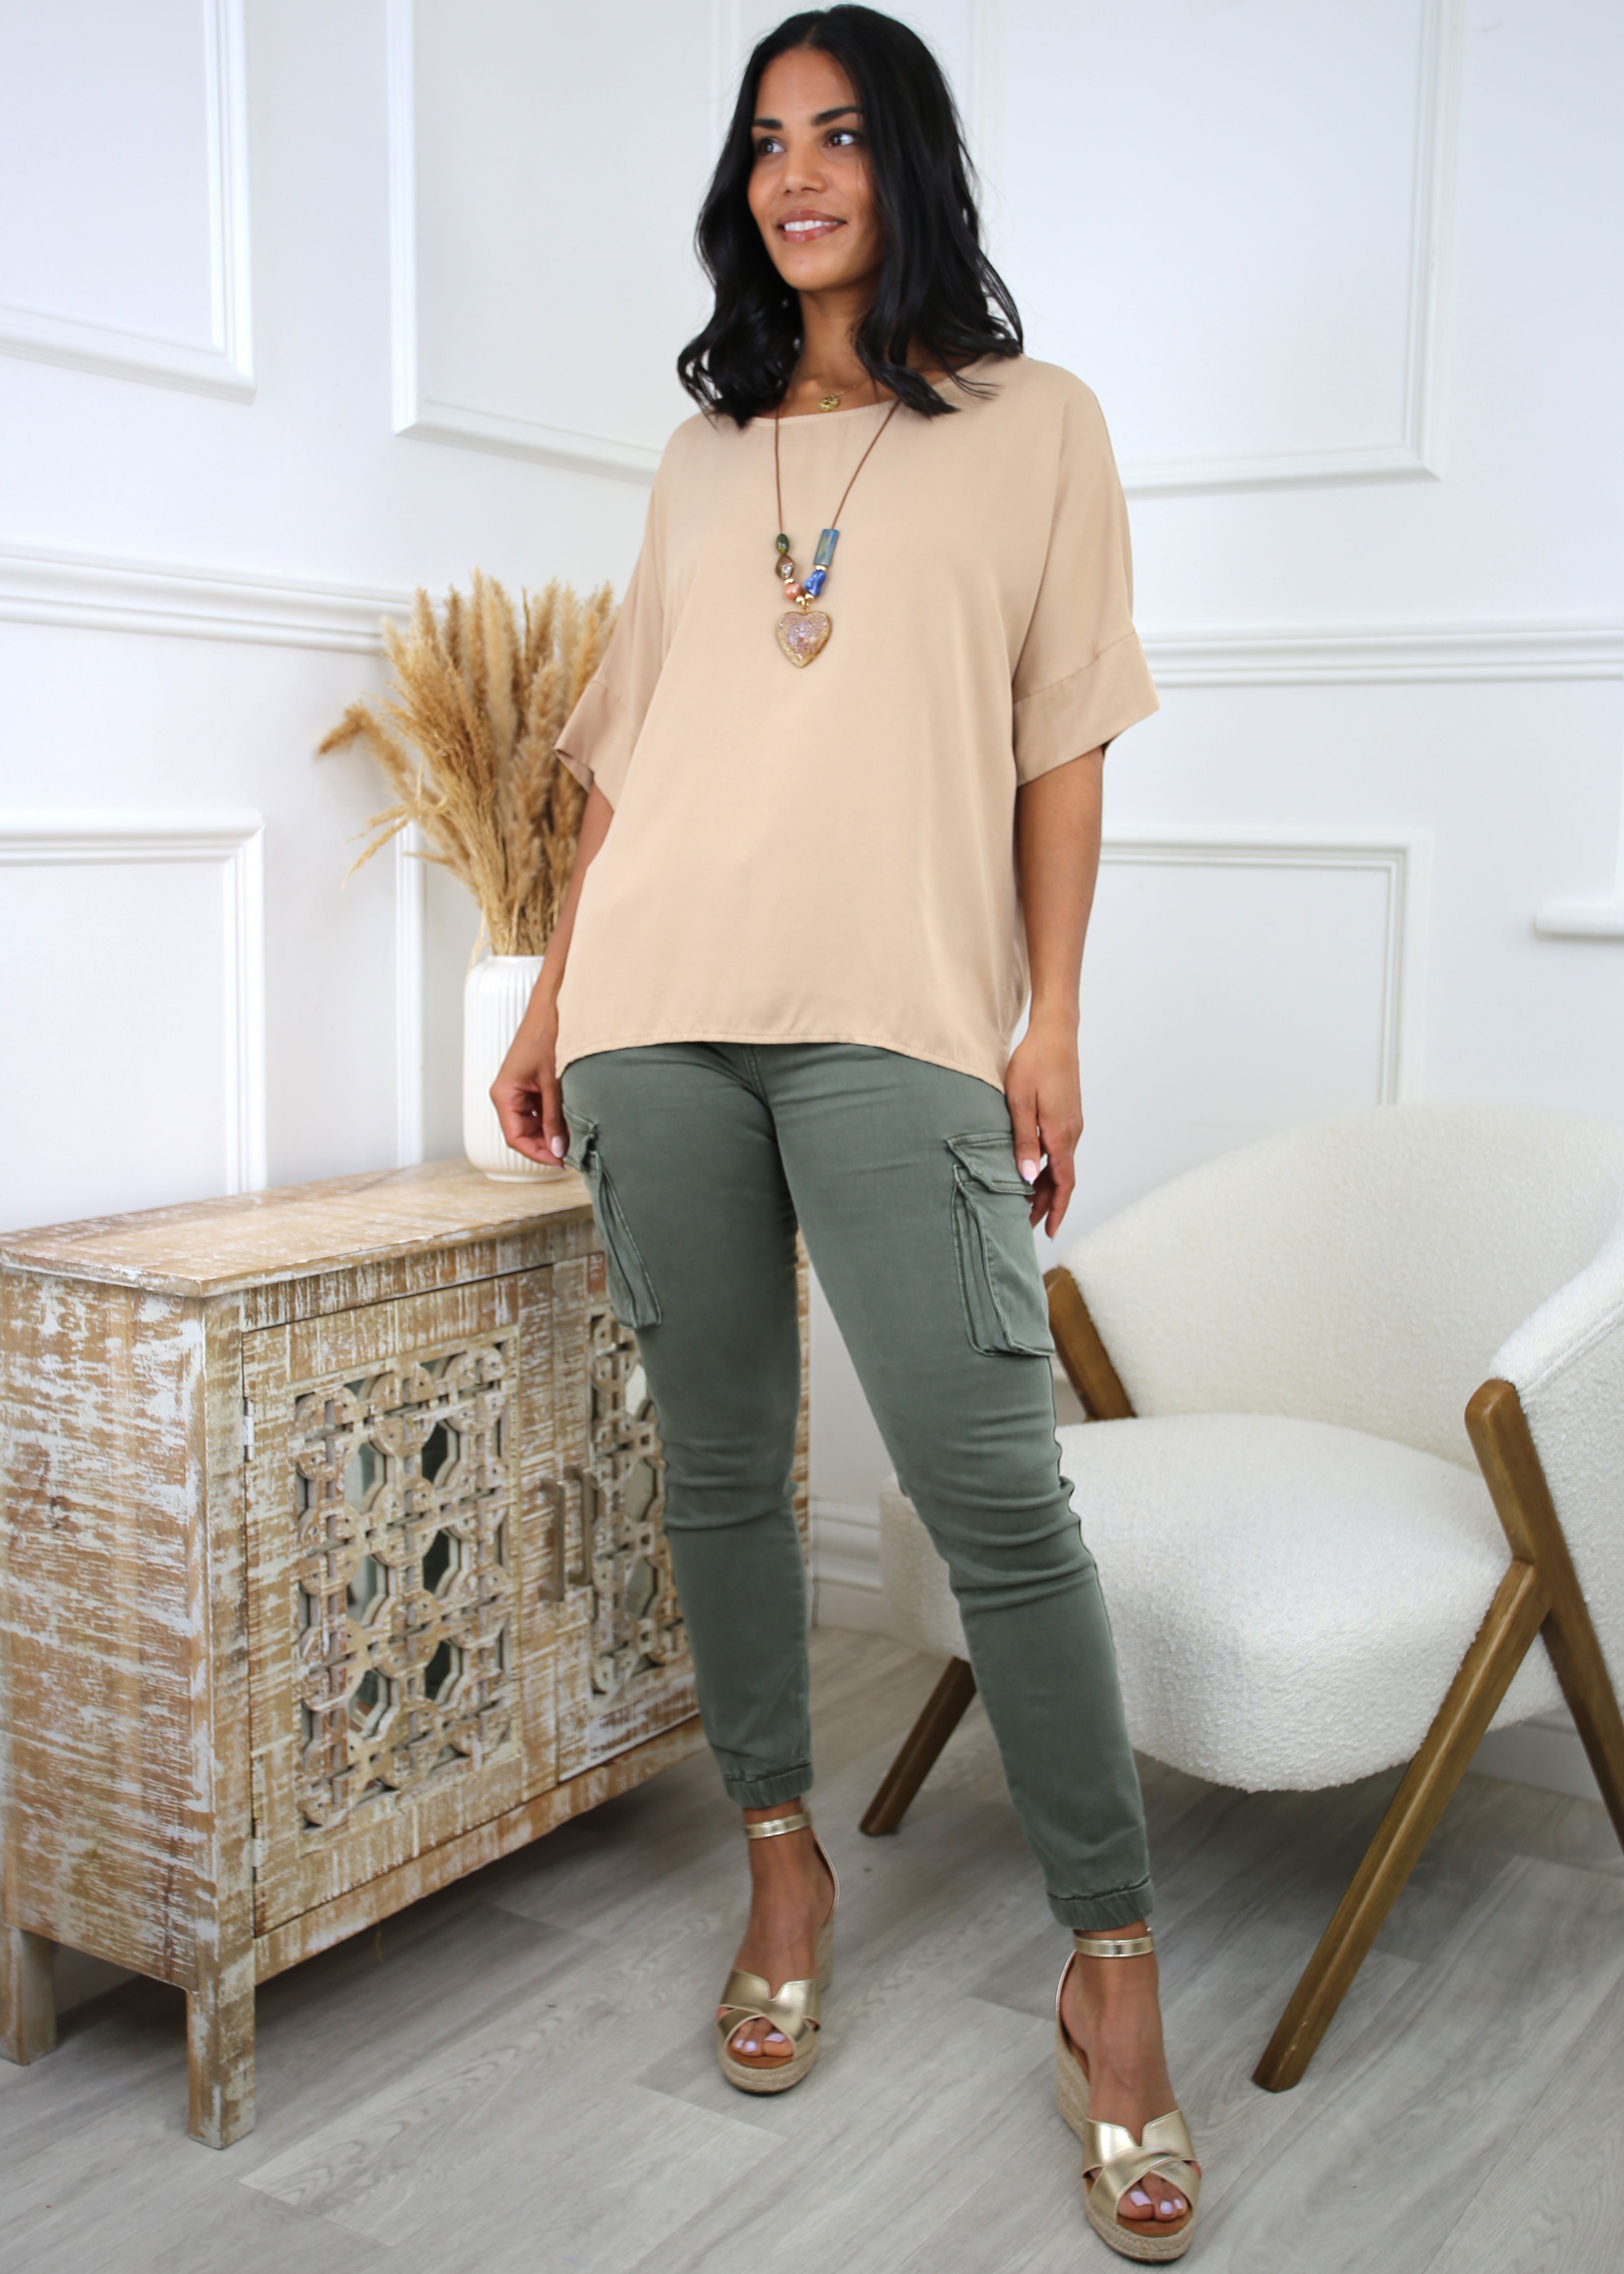 Kennedy Tan Necklace Blouse